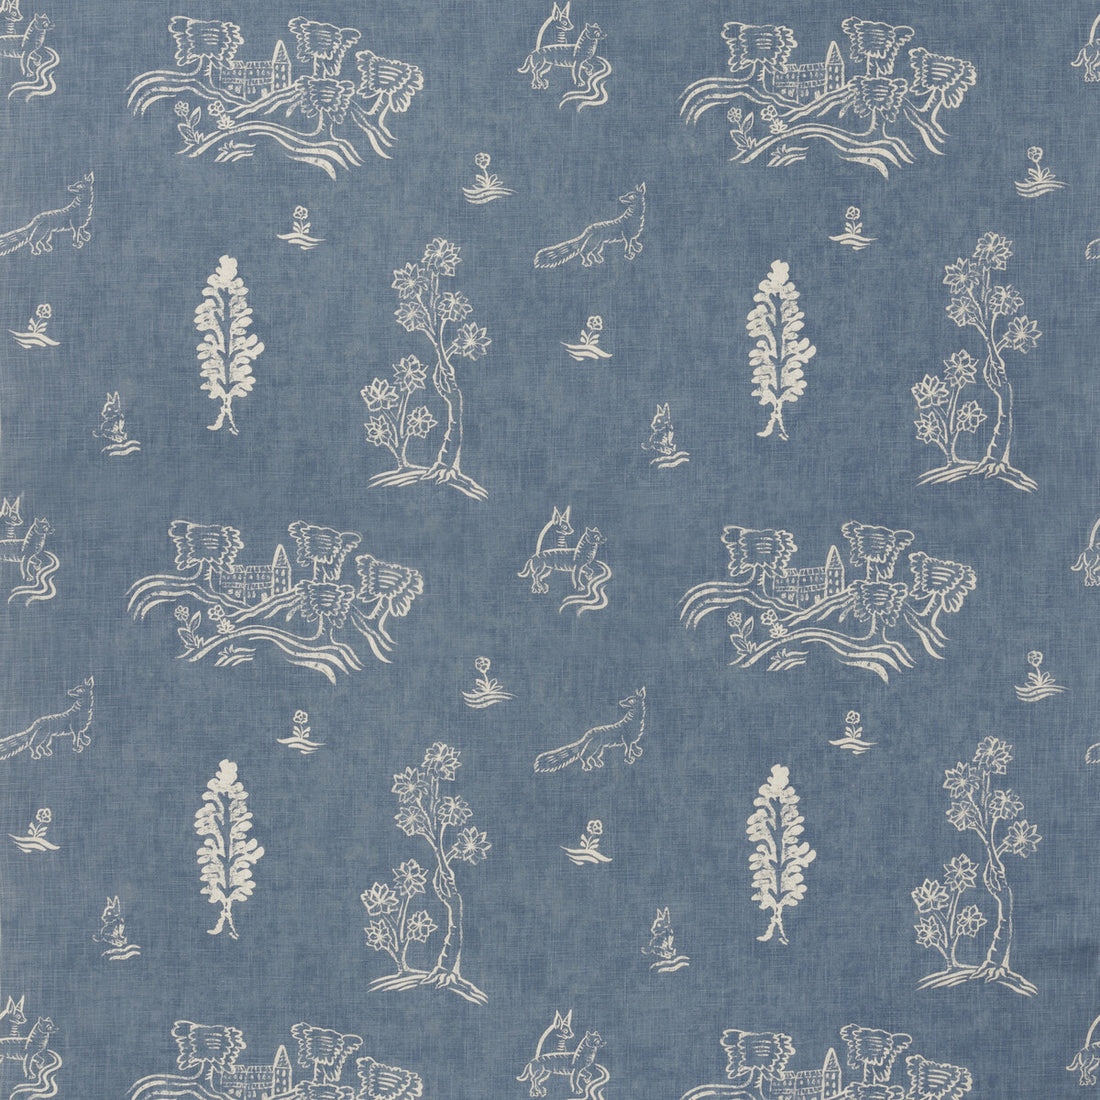 Friendly Folk fabric in happy blue color - pattern AM100318.5.0 - by Kravet Couture in the Andrew Martin Kit Kemp collection